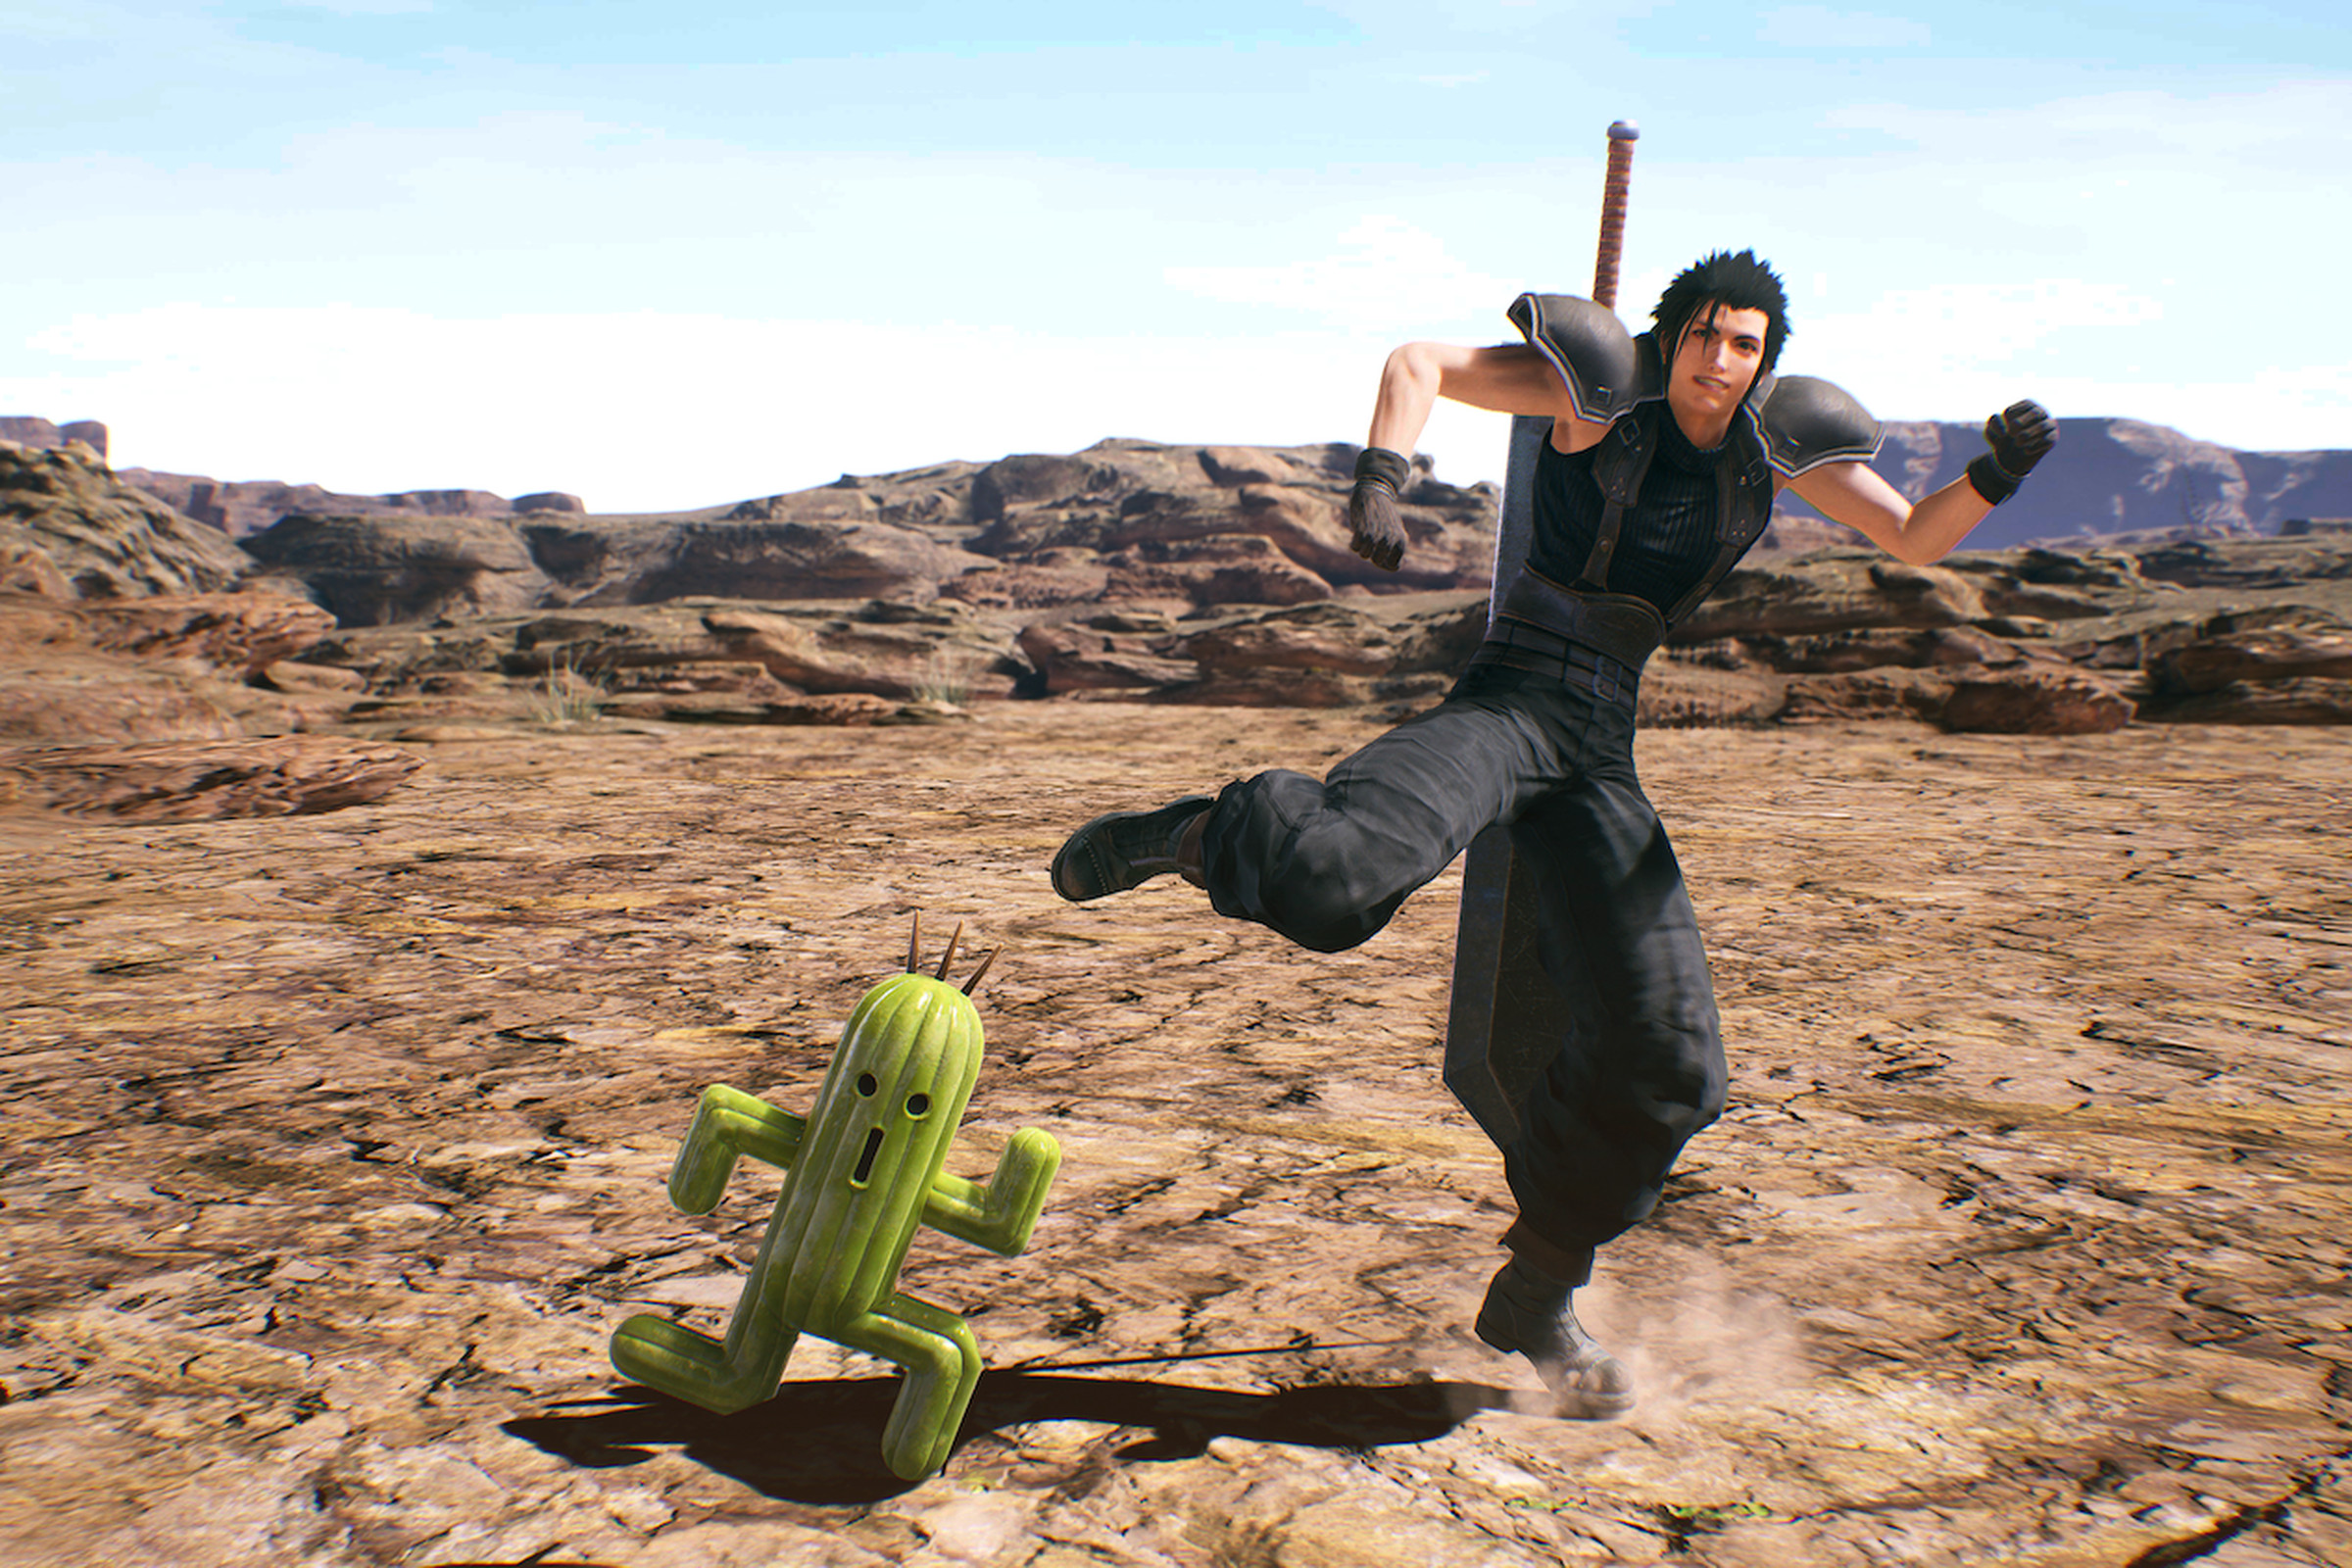 A screenshot from Crisis Core: Final Fantasy VII Reunion featuring Zack and a Cactuar.